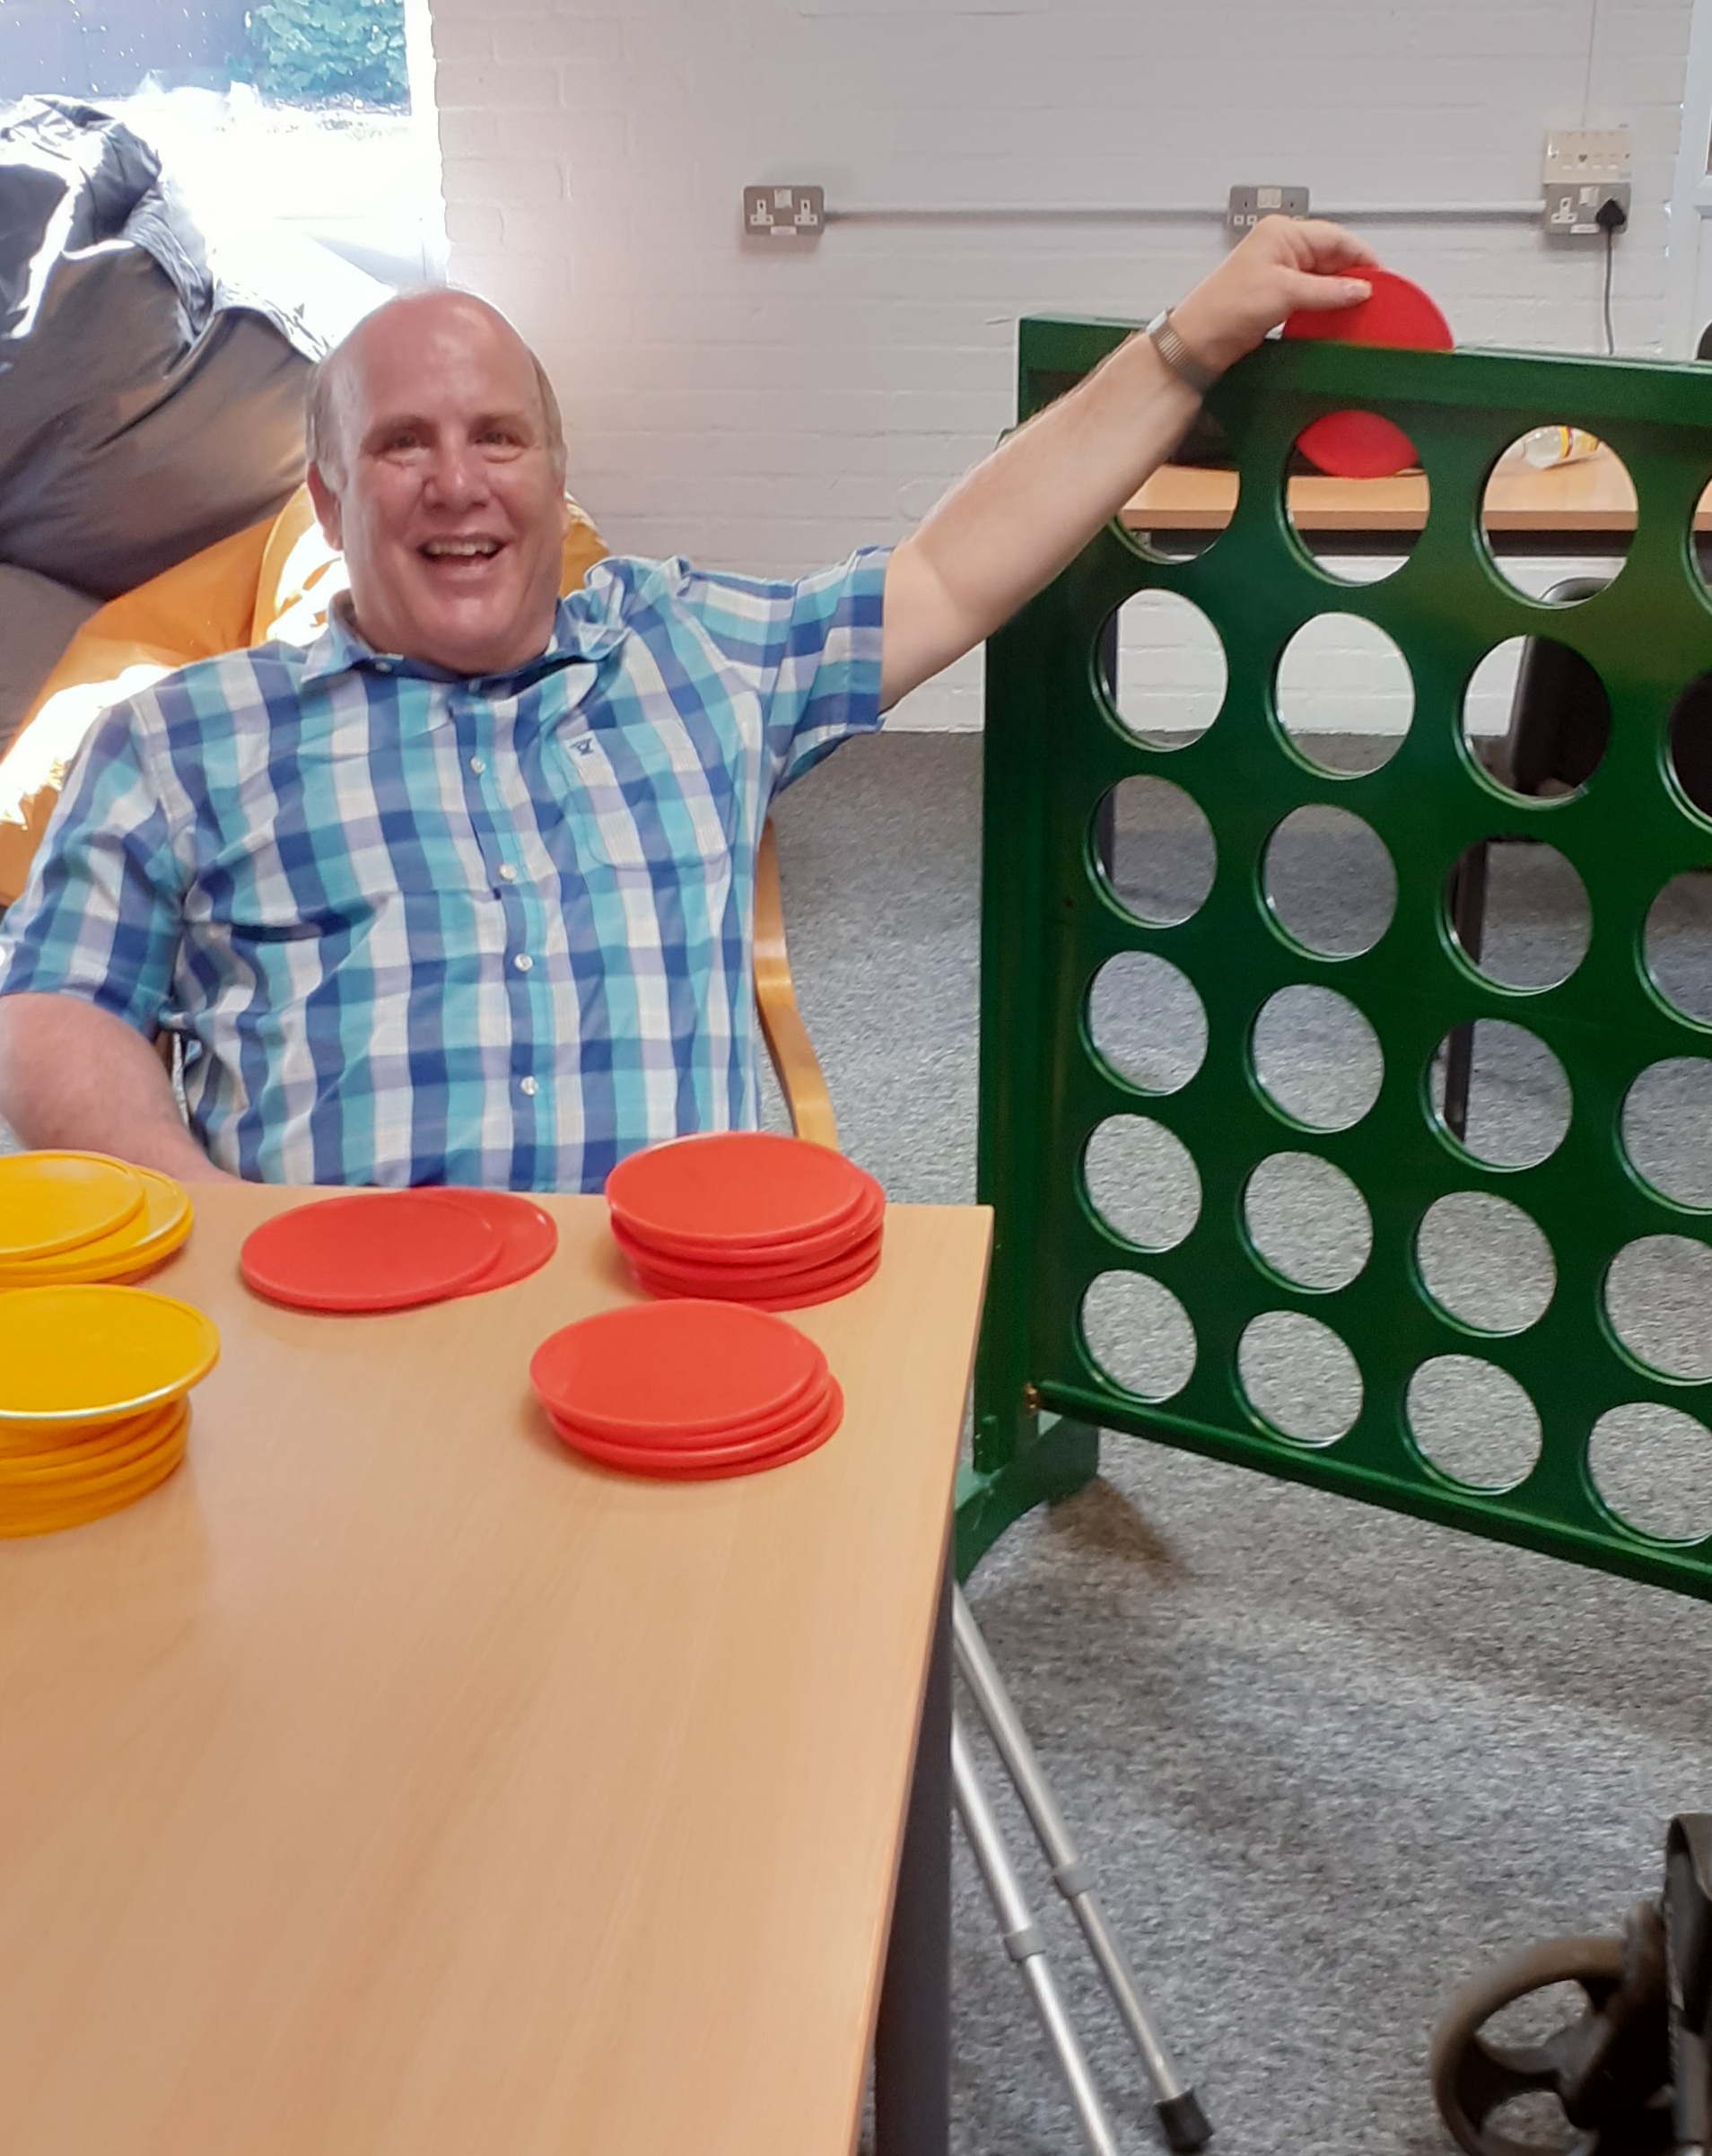 A customer playing connect 4